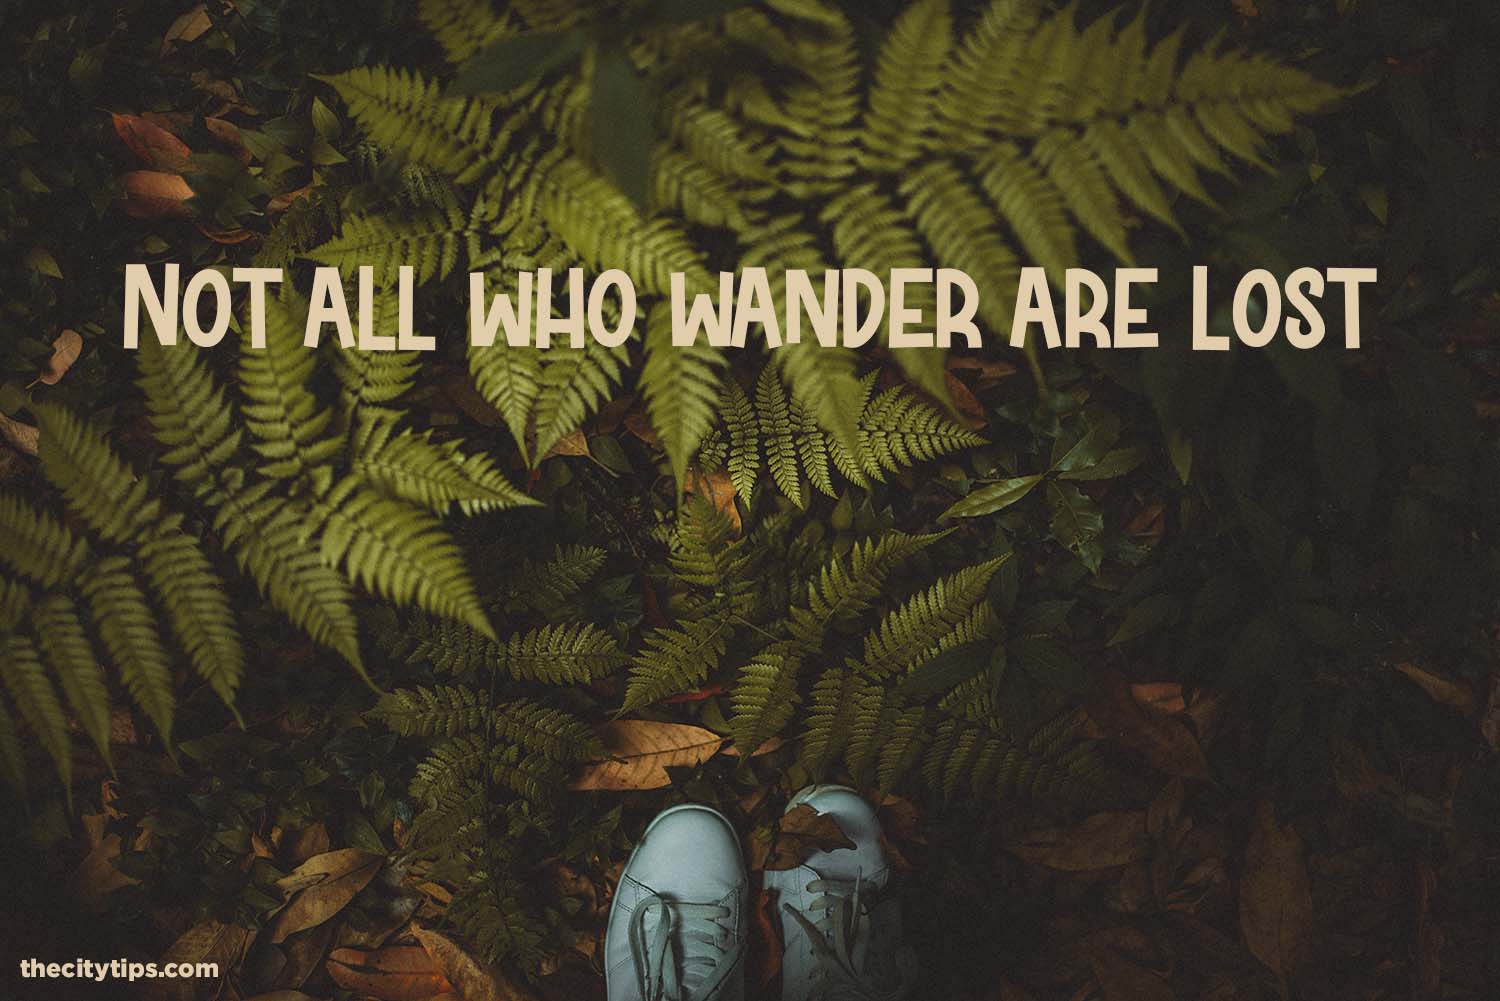 "Not all who wander are lost." by J.R.R. Tolkien